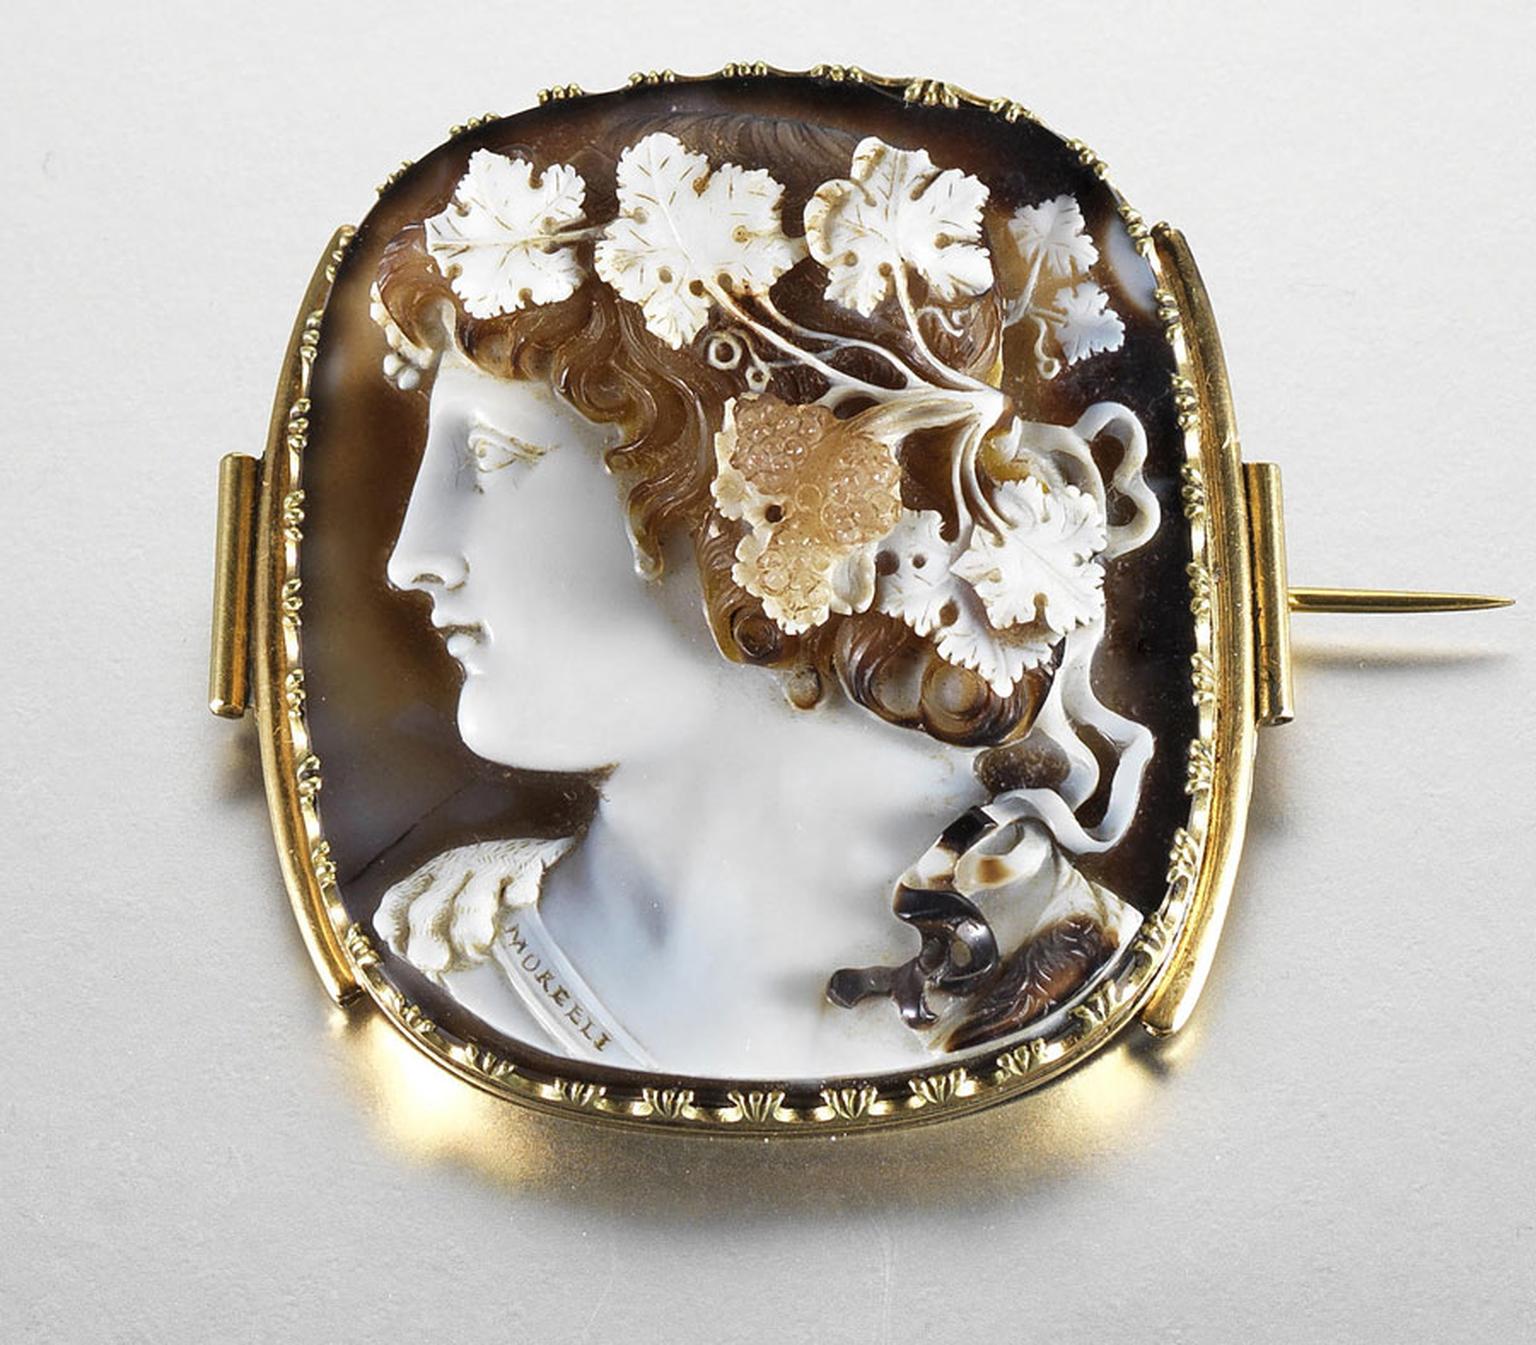 bonhams-A-late-18thearly-19th-century-onyx-cameo-brooch,-by-Morelli